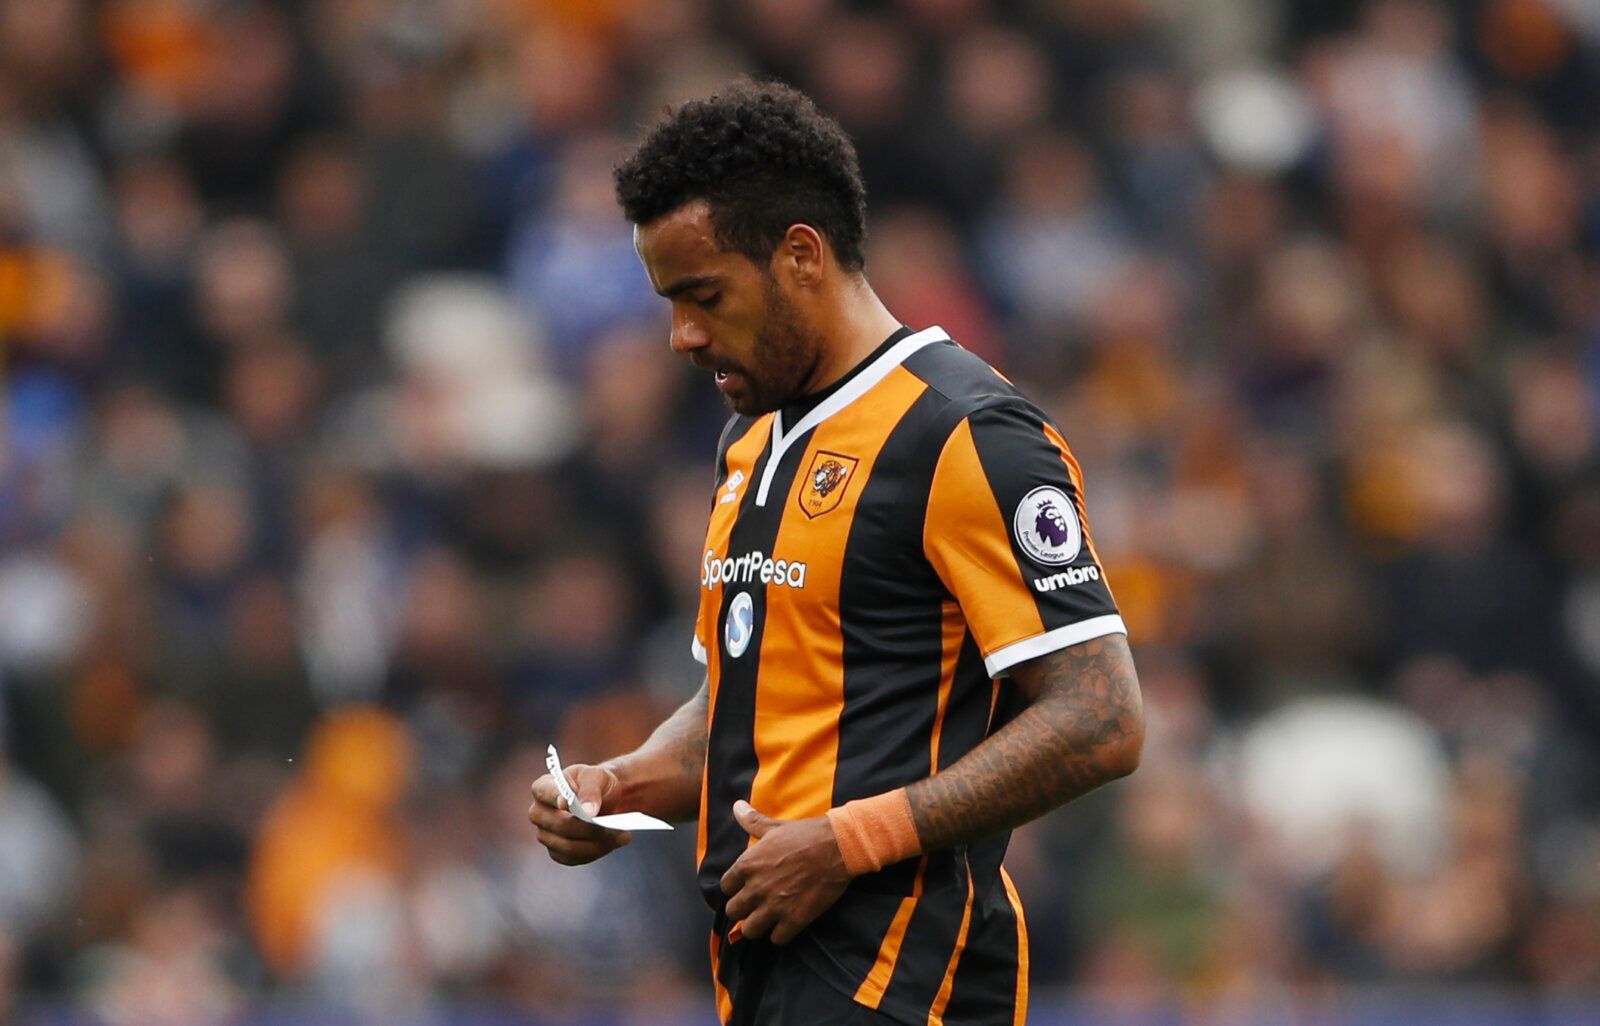 Britain Soccer Football - Hull City v Sunderland - Premier League - The Kingston Communications Stadium - 6/5/17 Hull City's Tom Huddlestone  Action Images via Reuters / Lee Smith Livepic EDITORIAL USE ONLY. No use with unauthorized audio, video, data, fixture lists, club/league logos or 